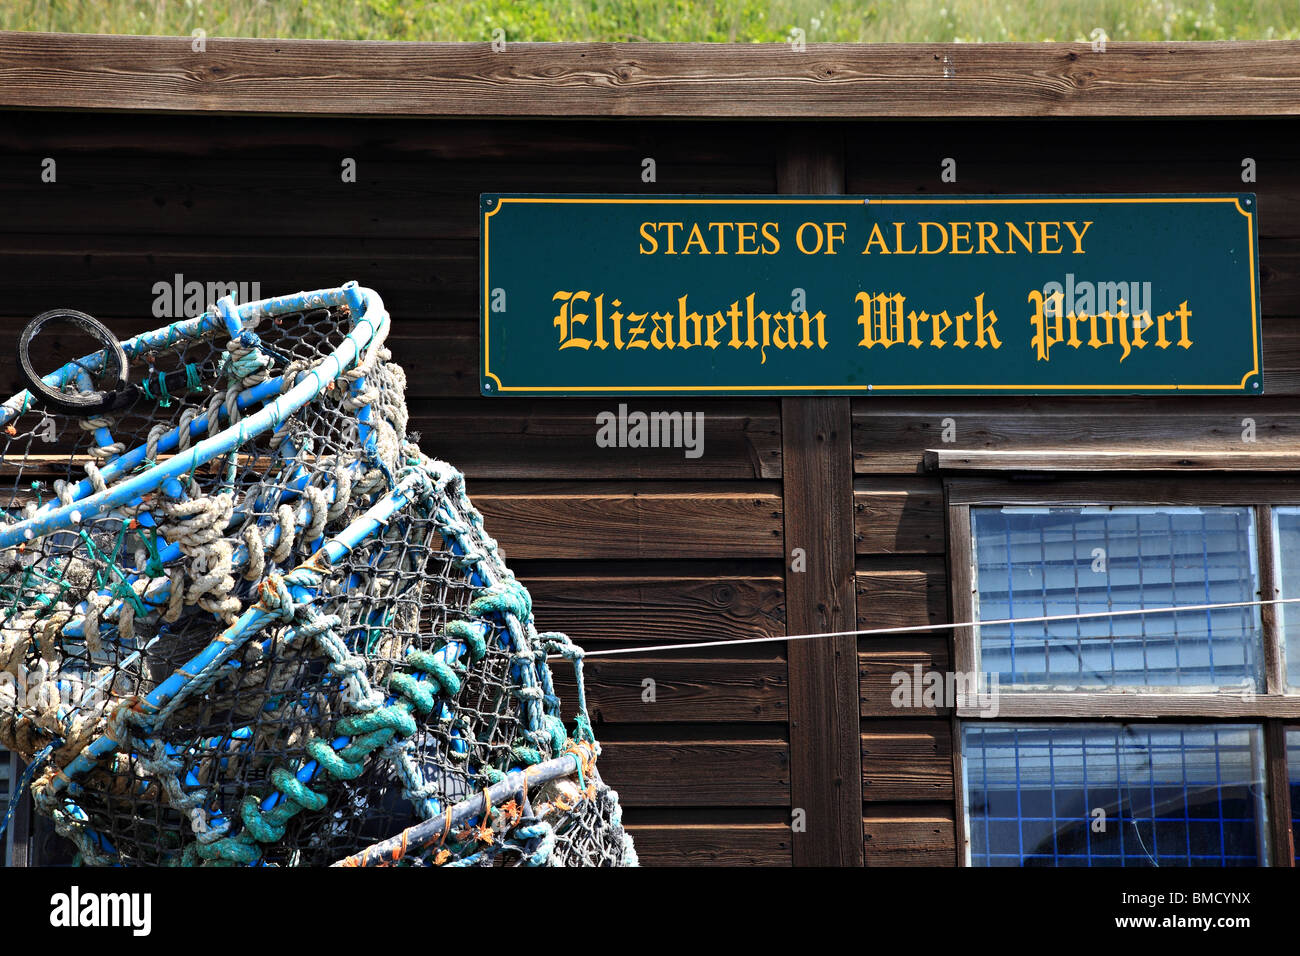 Elizabethan Wreck Project States of Alderney Sign on the hut in the harbour and crab pots, Alderney, Channel Island, UK Stock Photo